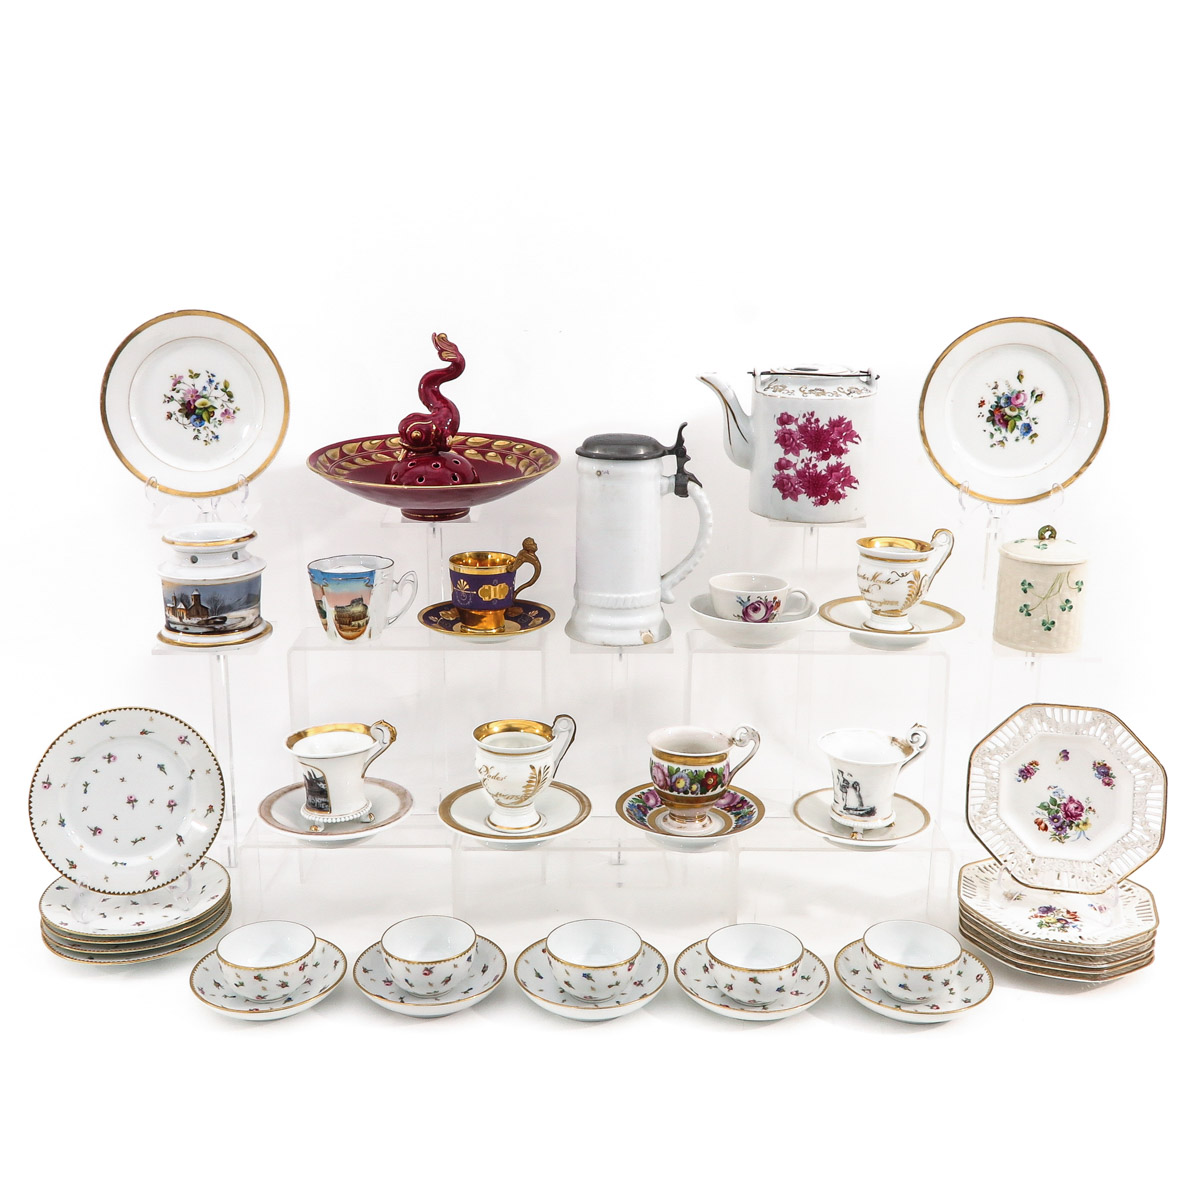 A Collection of Porcelain and Pottery